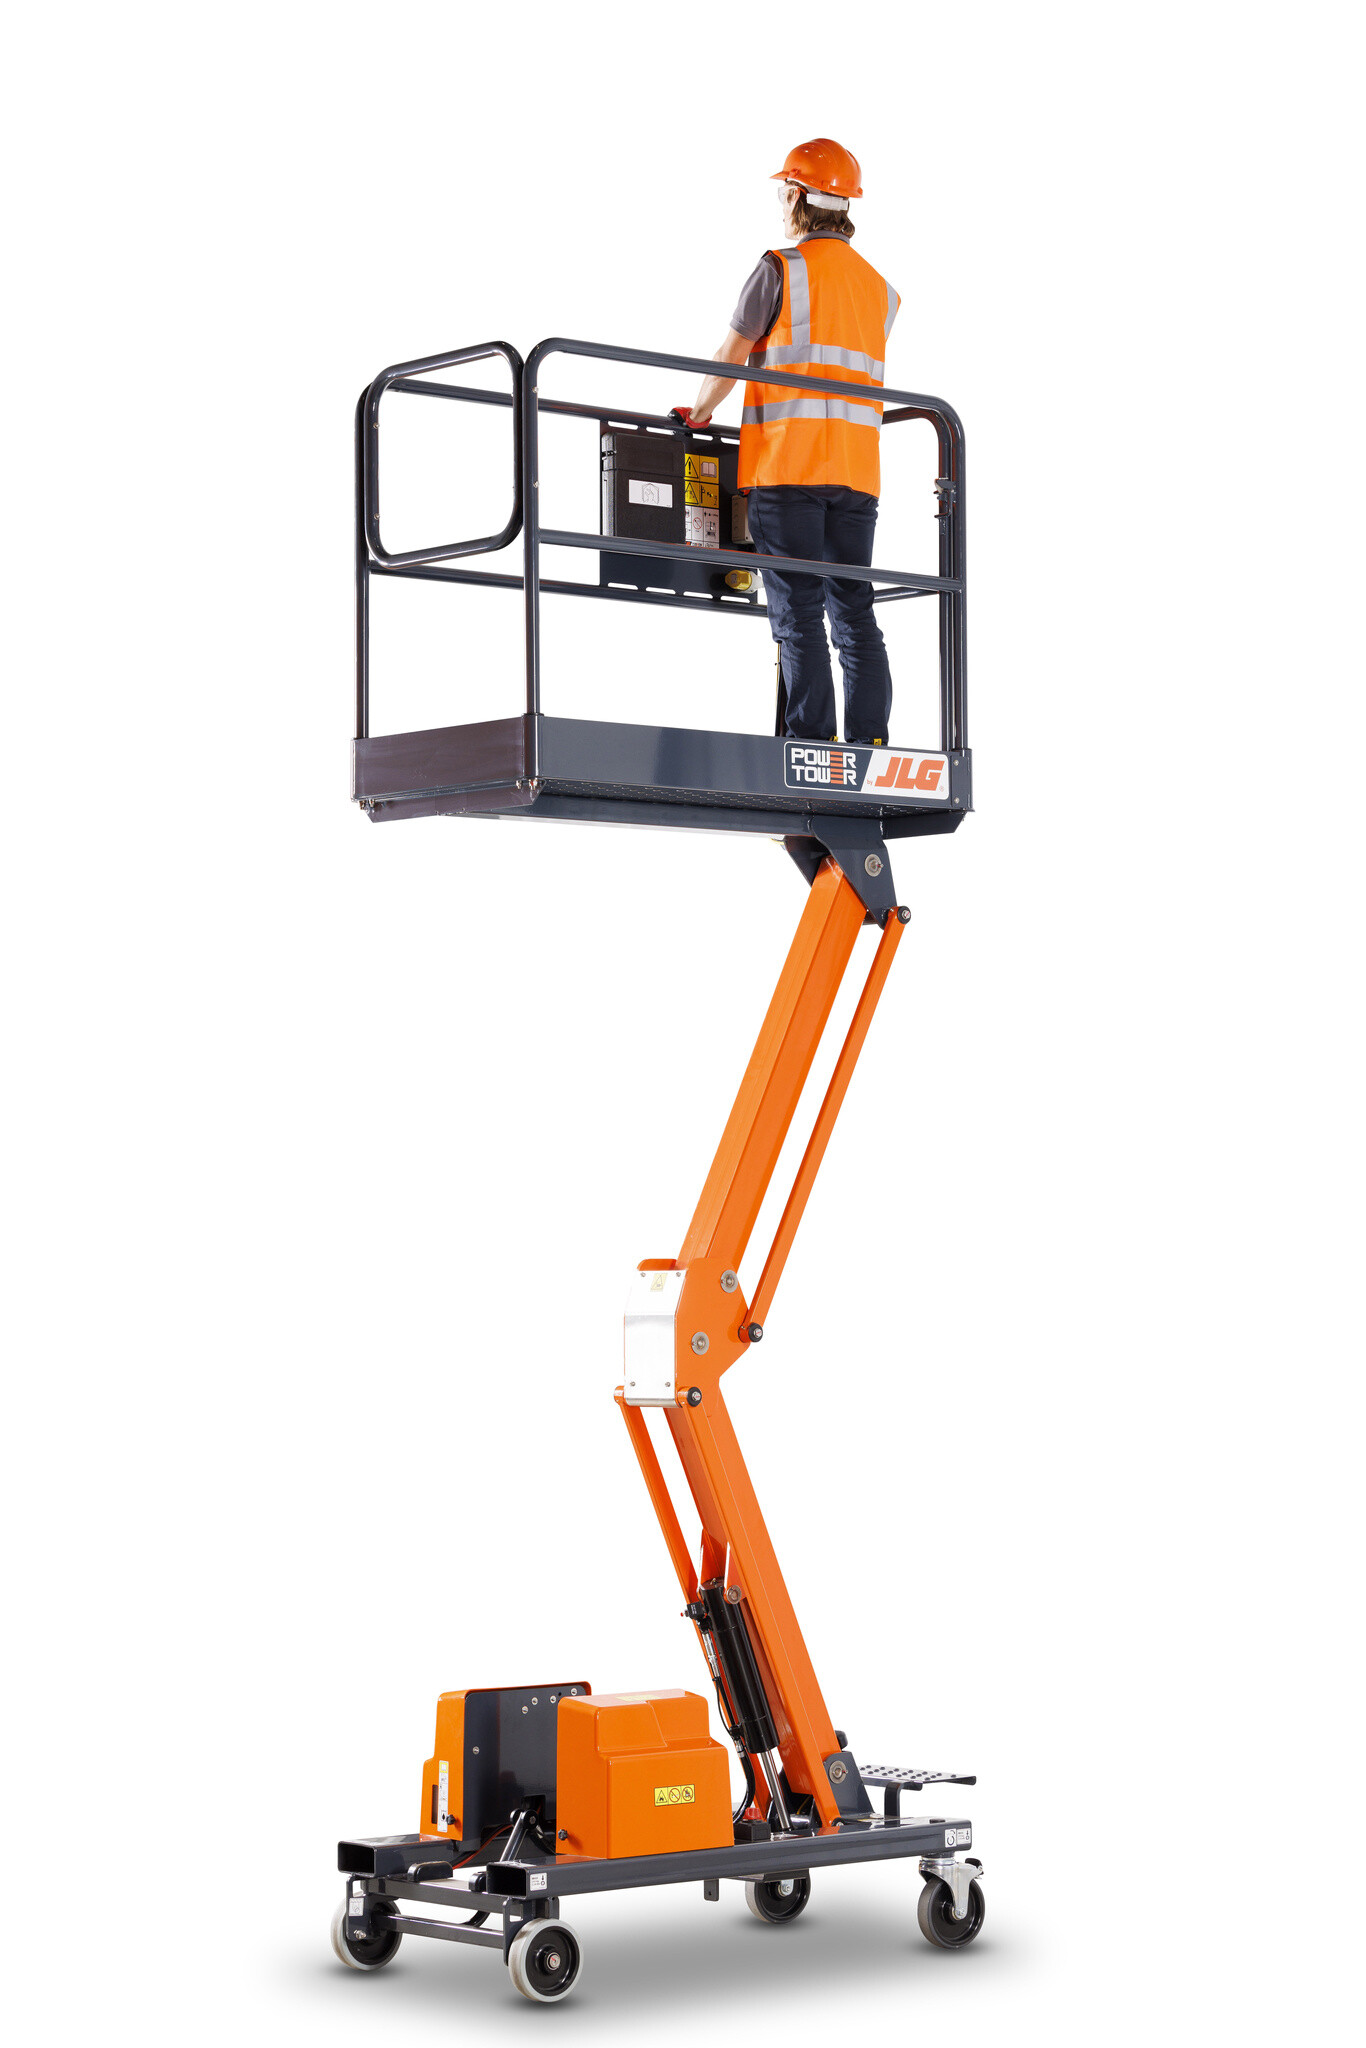 Push Around Vertical Lifts, Powered Access